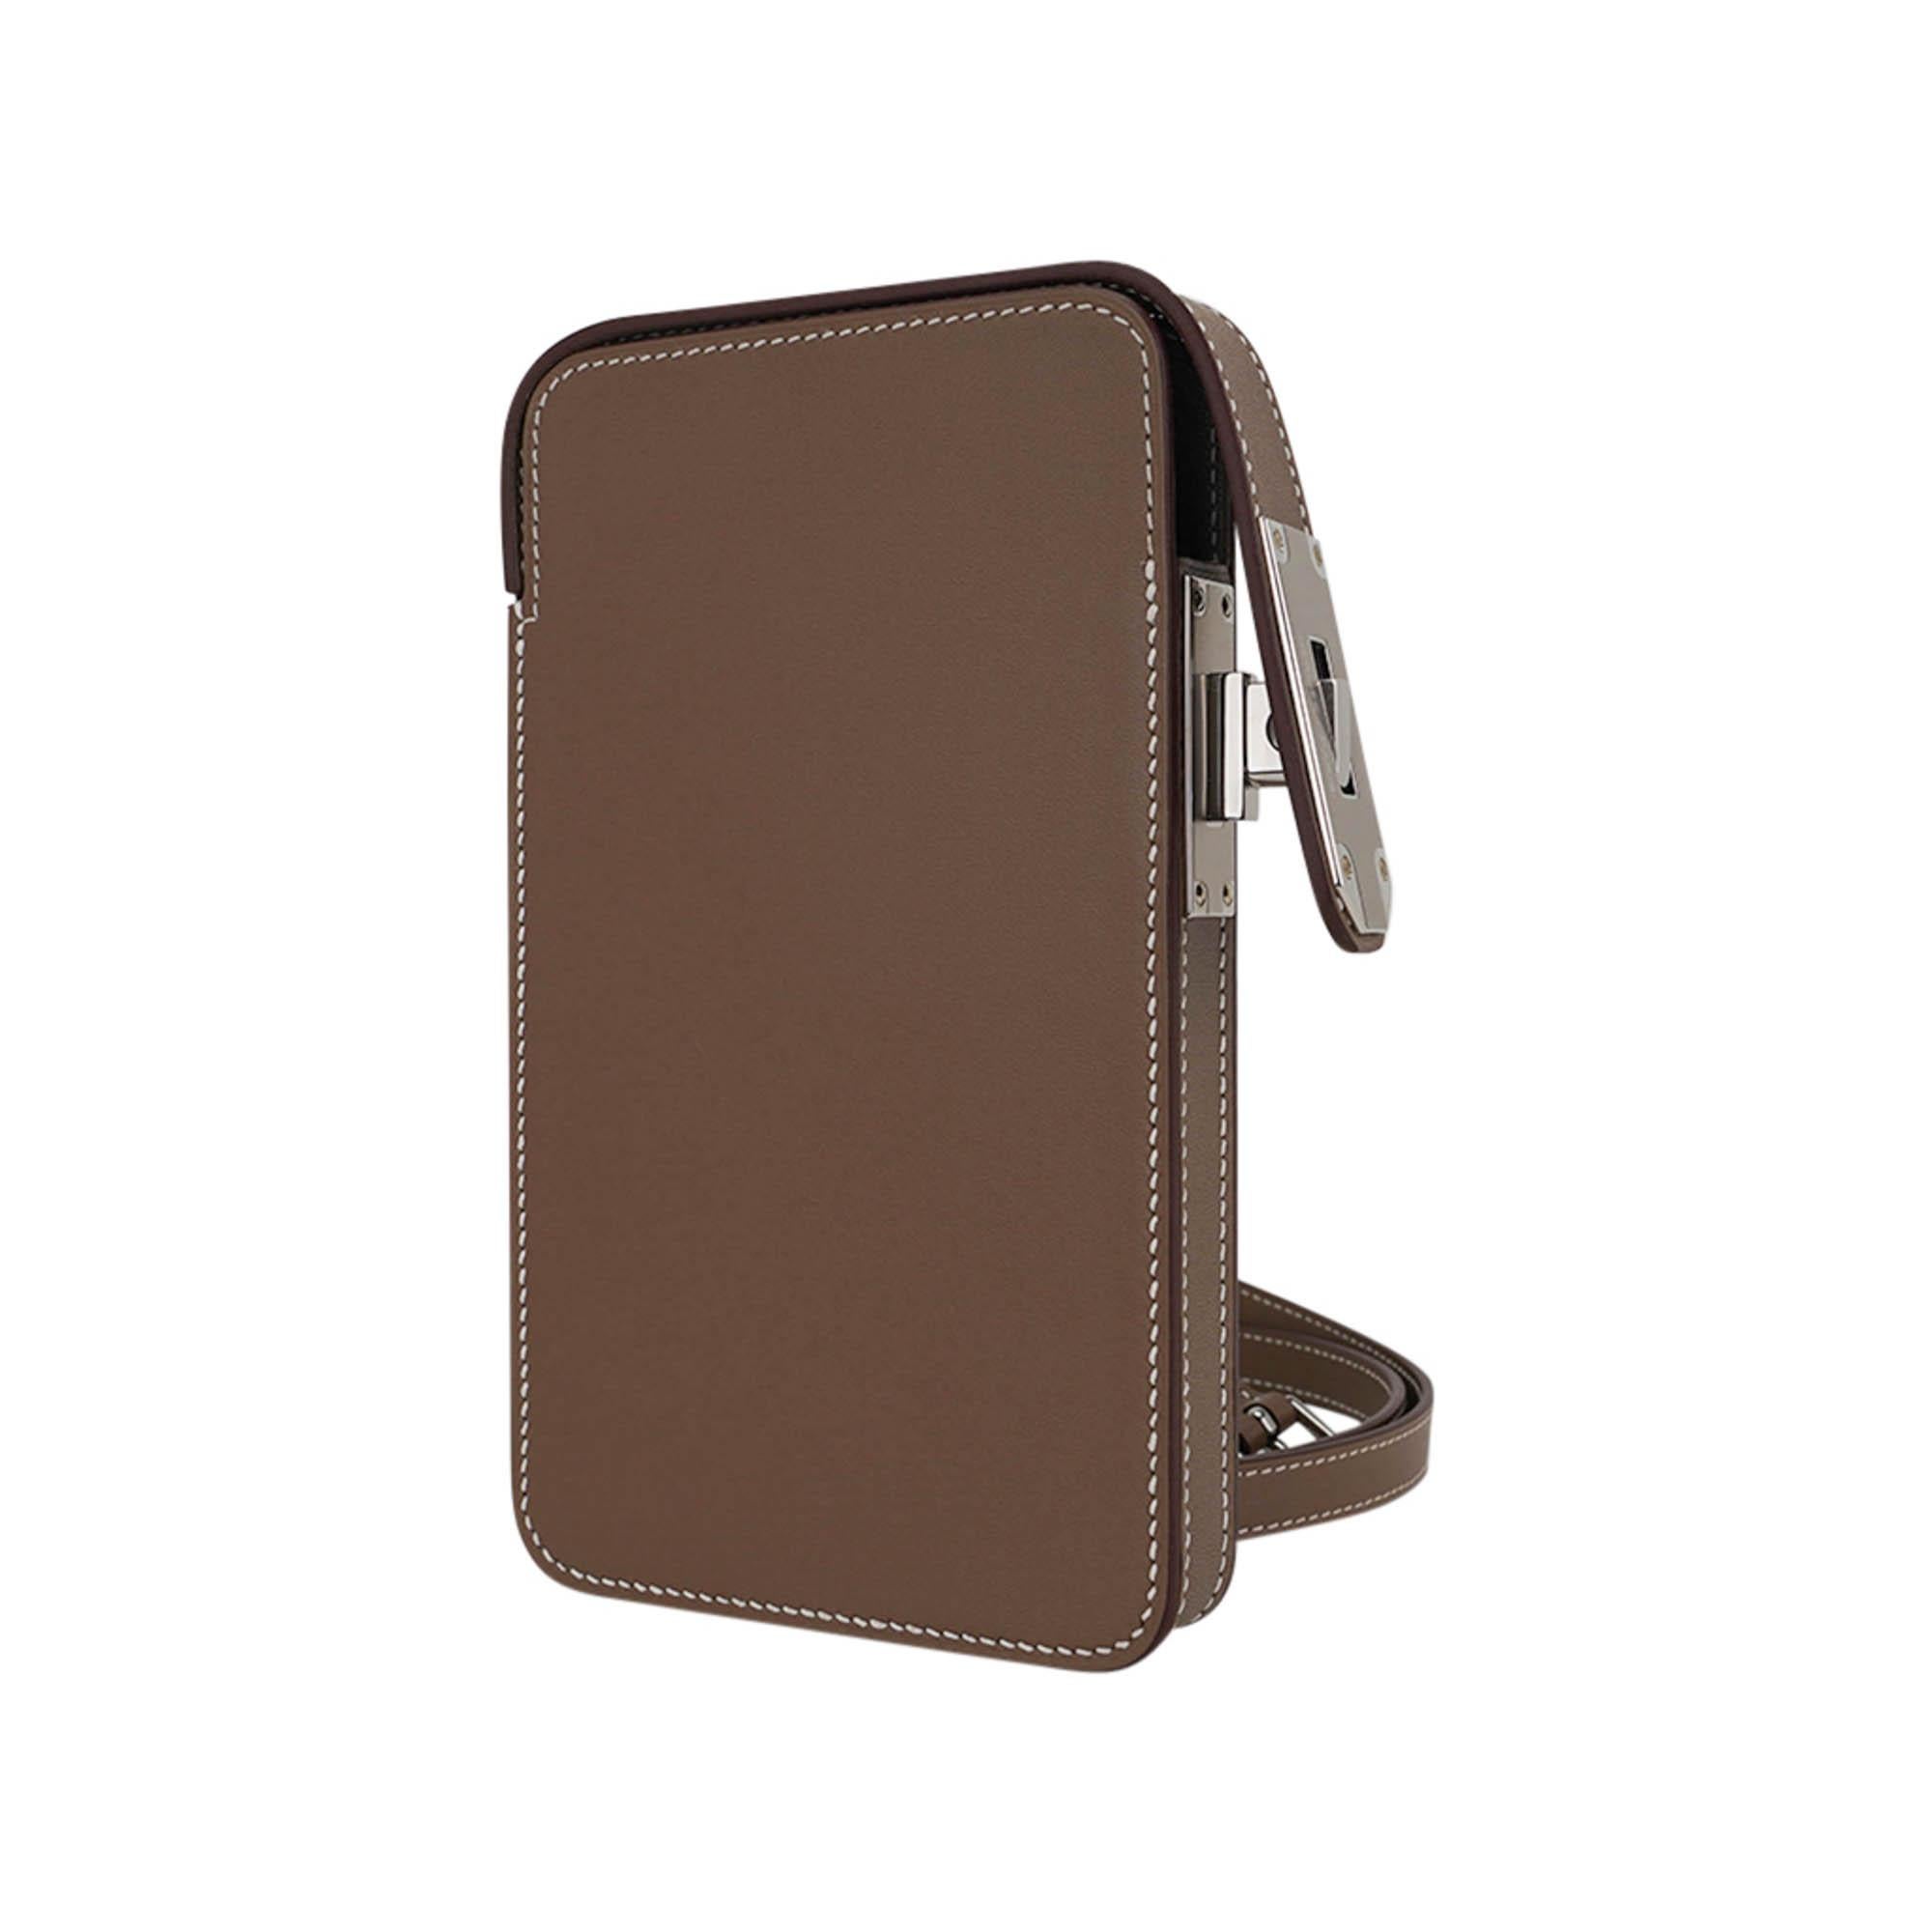 Mightychic offers a limited edition Hermes Hac a Box Phone Case featured in Etoupe Tadelakt calf leather.
Rich with Palladium hardware.
This very rare to find versatile case with adjustable strap can be carried on the shoulder or as crossbody.
With